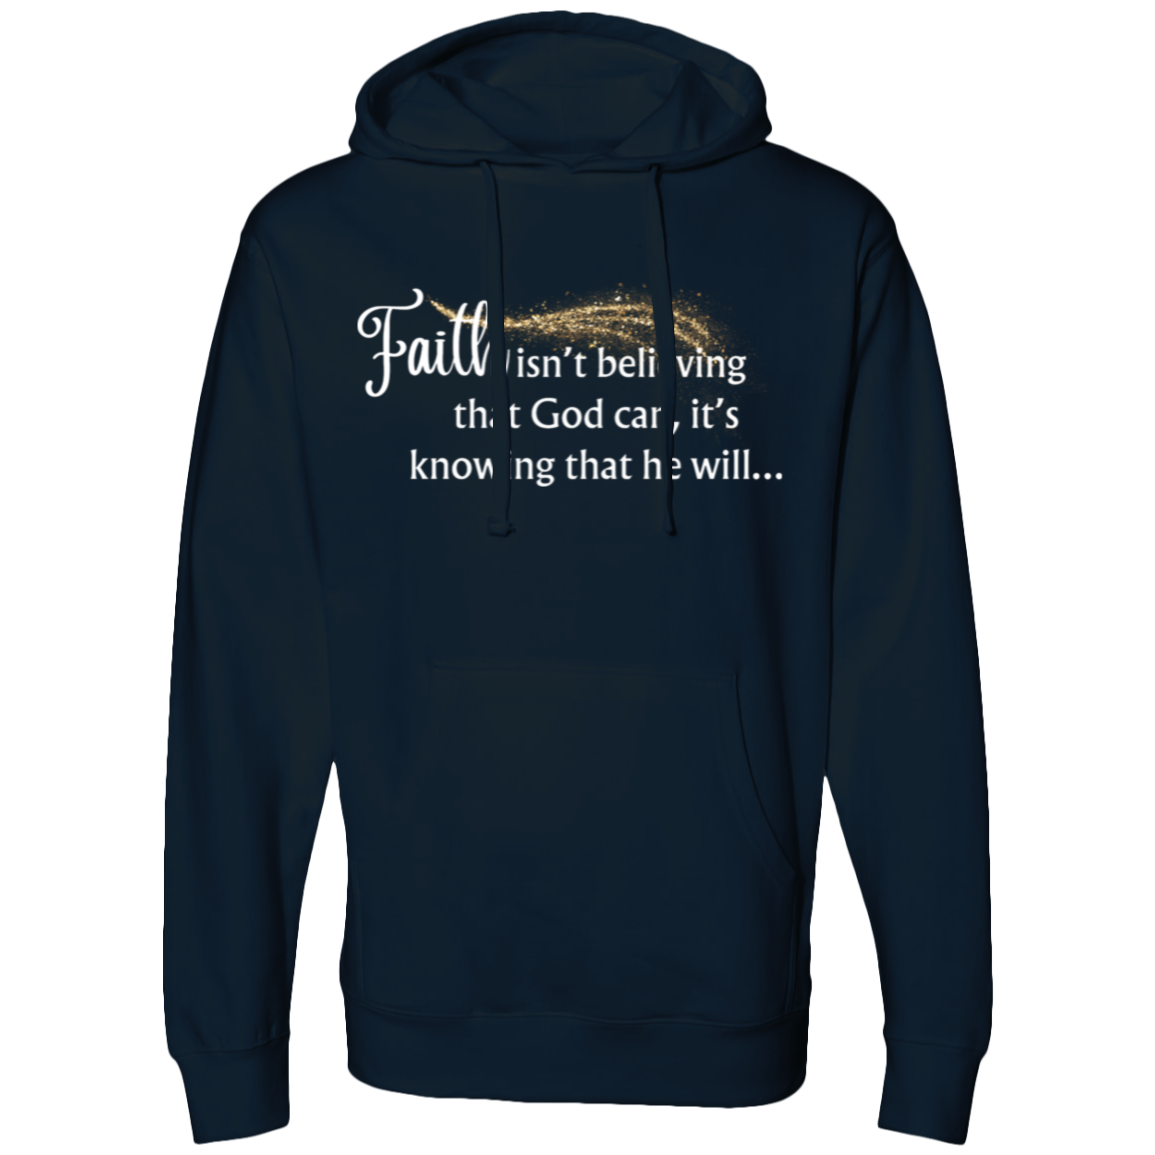 Faith Hooded Sweatshirt Perfect gift for your loved ones to feel wrapped up in Gods love